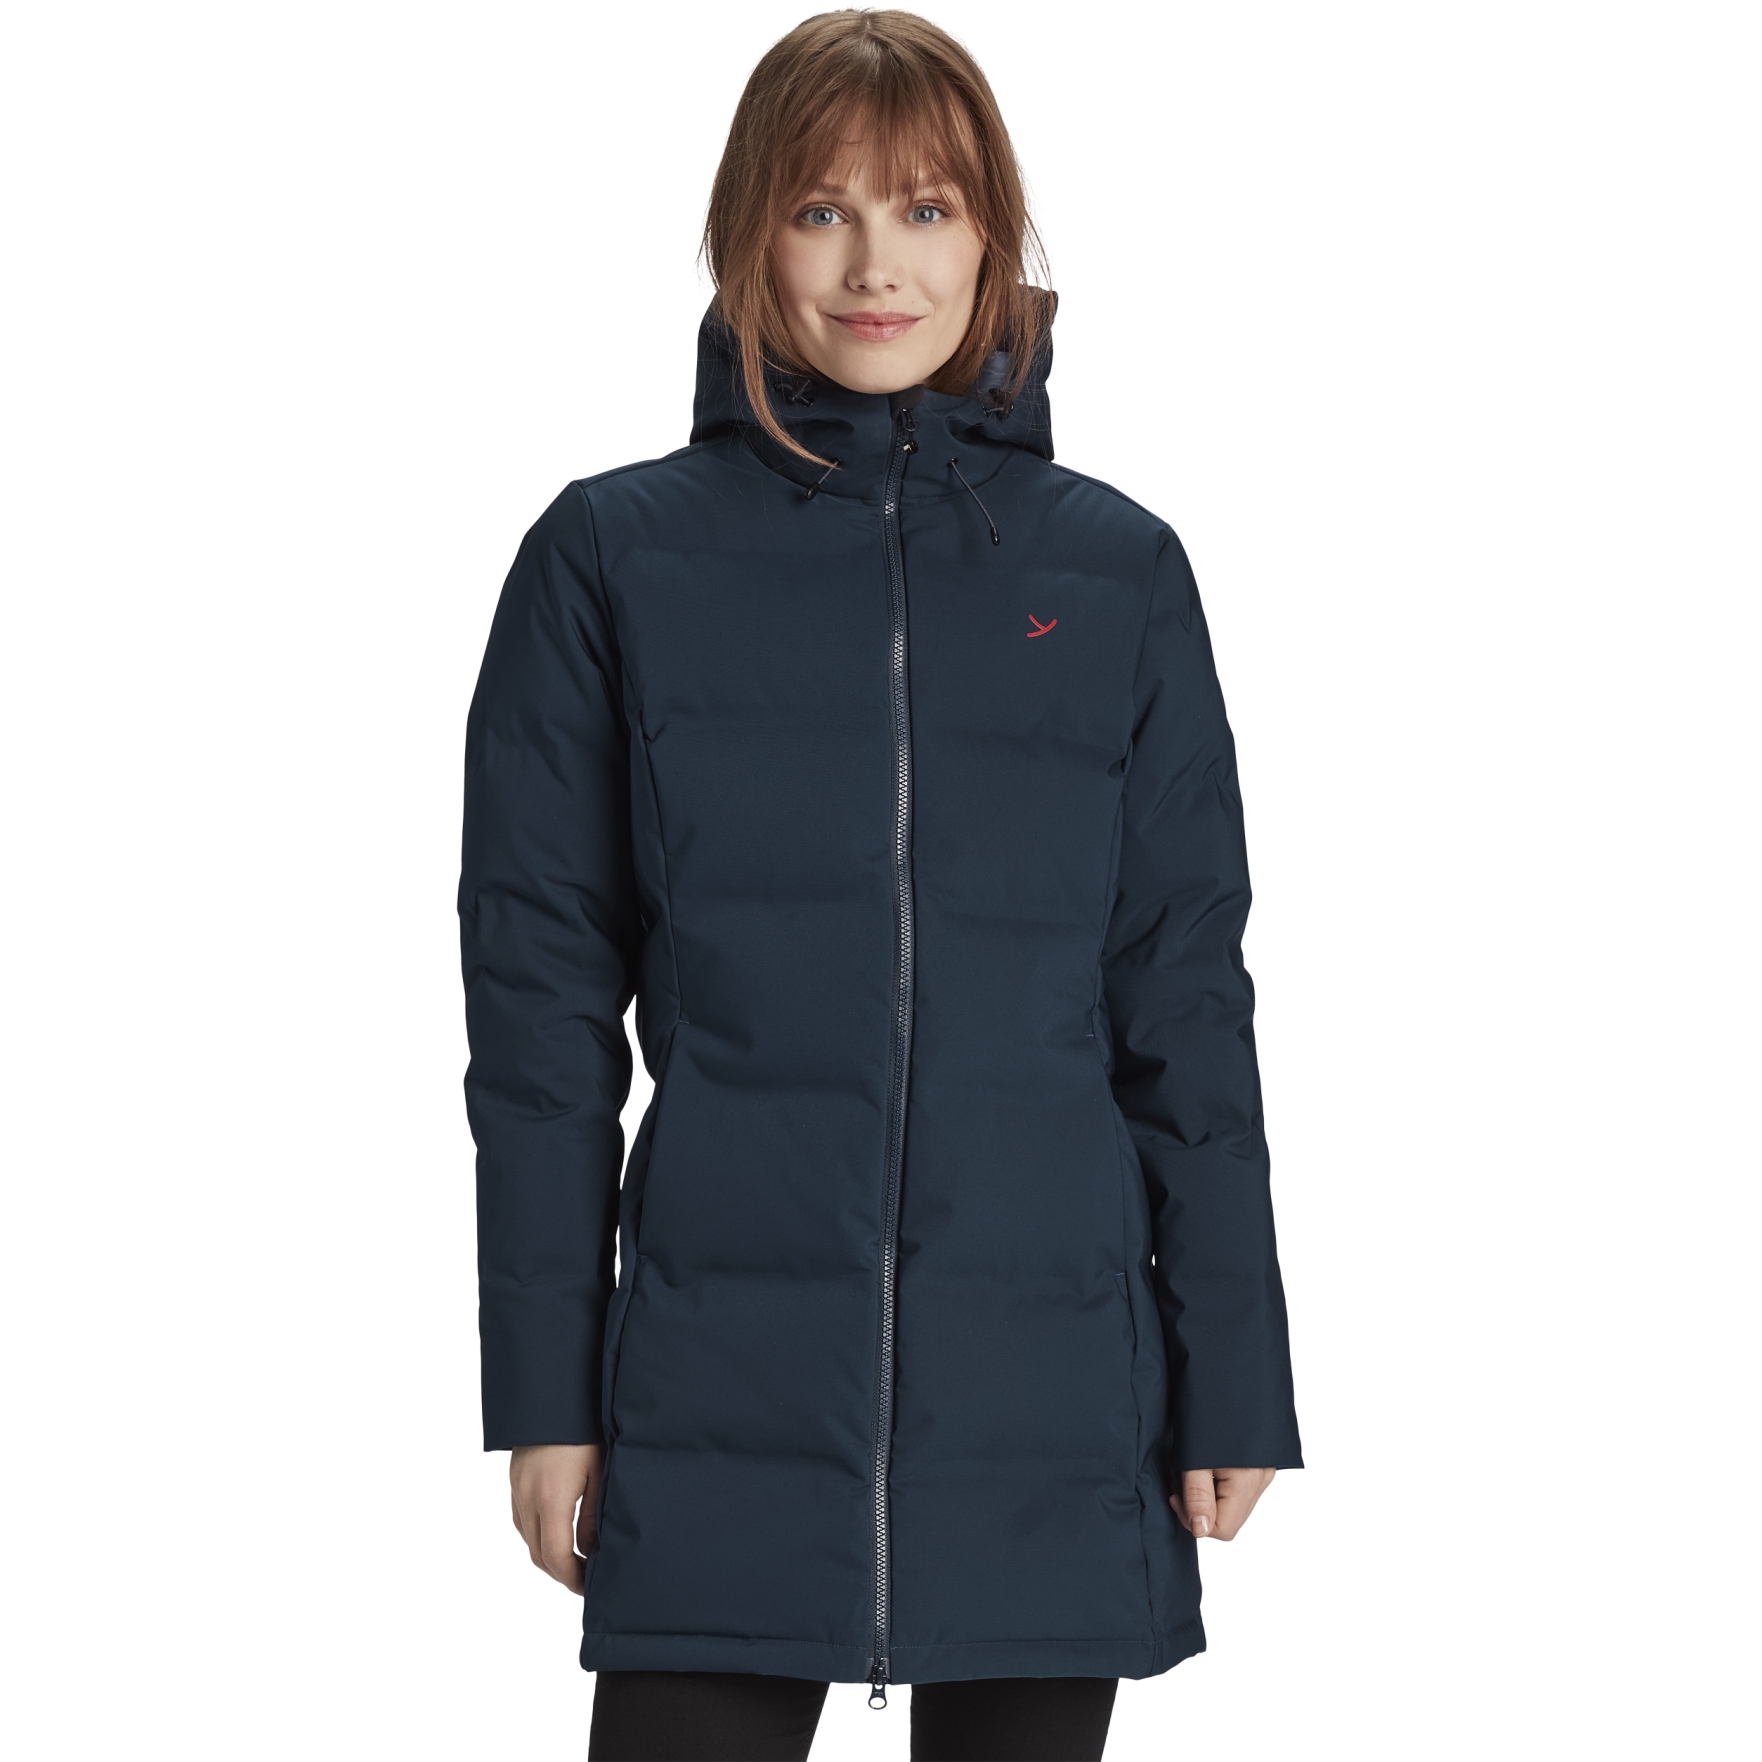 Picture of Y by Nordisk Aukea Down Coat Women - dress blue